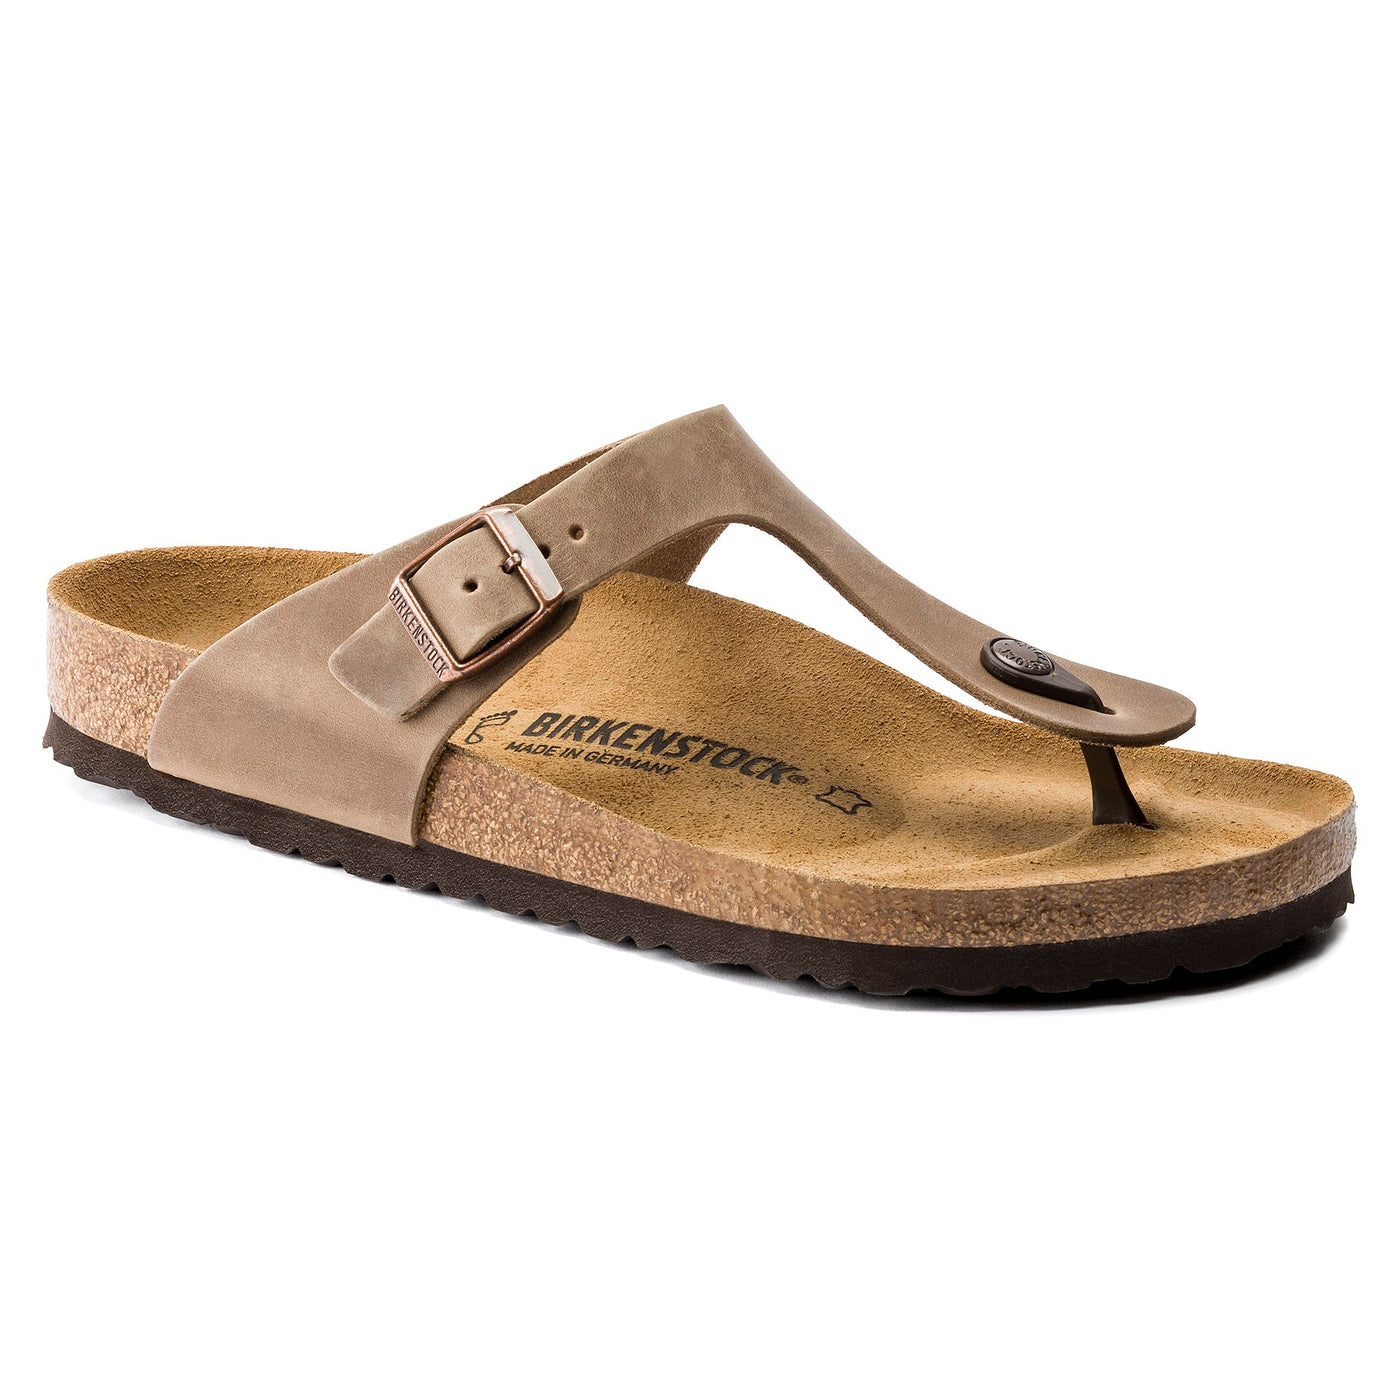 Birkenstock - Gizeh - Tobacco Brown Oiled Leather